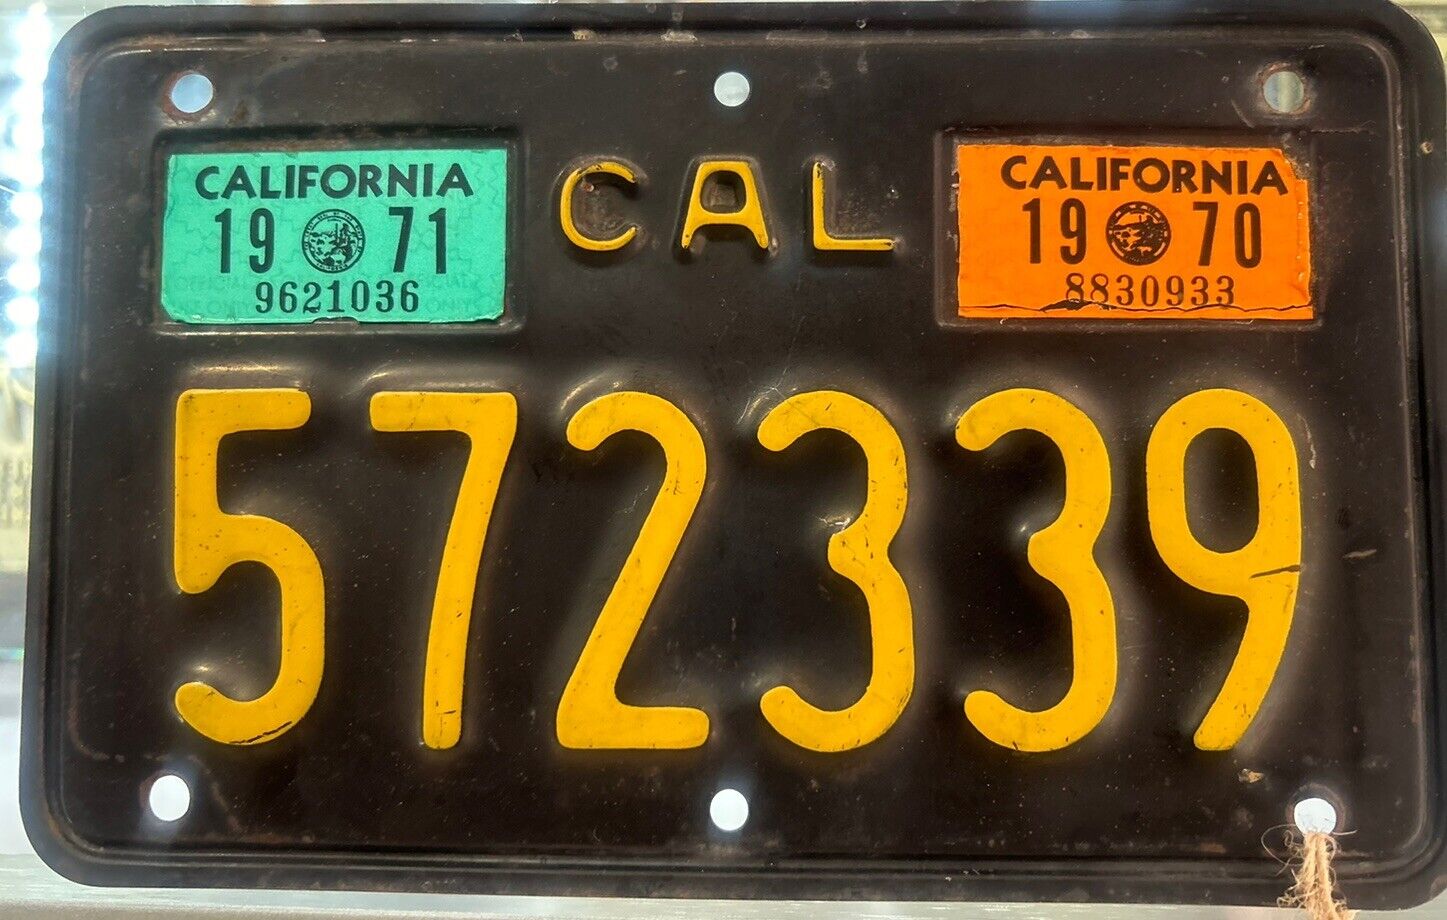 1963 California Motorcycle License Plate 1970 Validation DMV Clear Very Nice OG